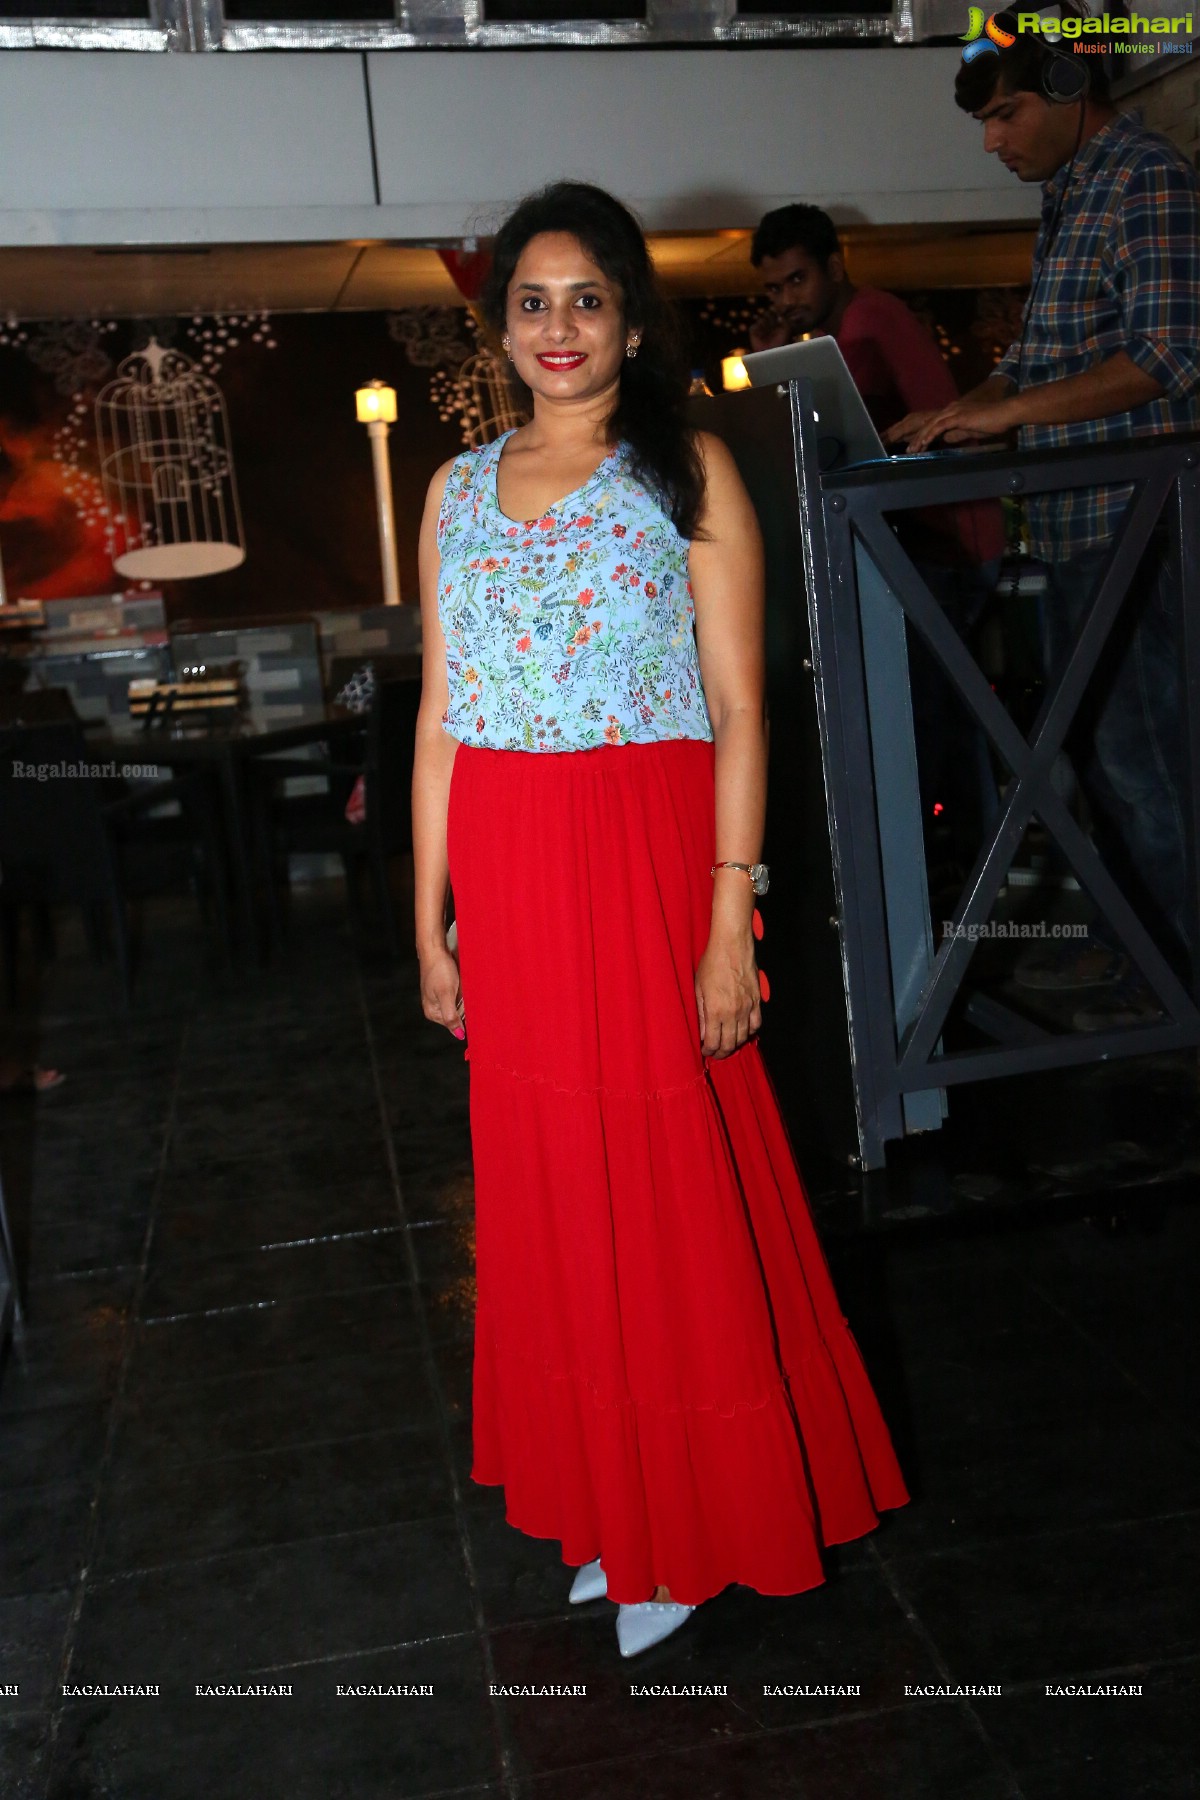 Grand Launch of #Hashtag Bar/Bistro in Hyderabad